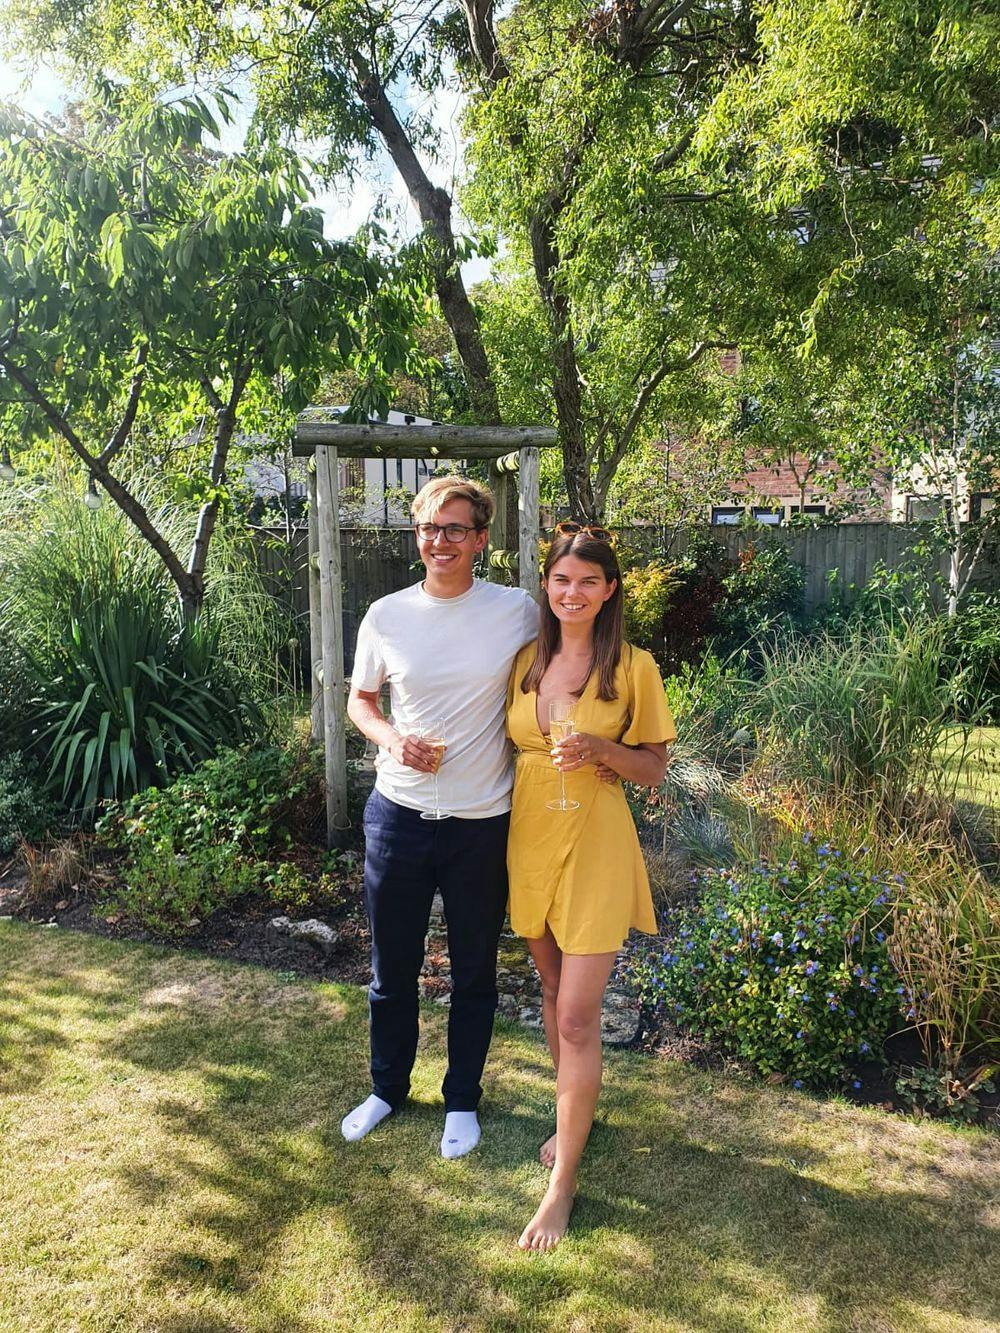 Fred and his fiance standing and smiling in a garden